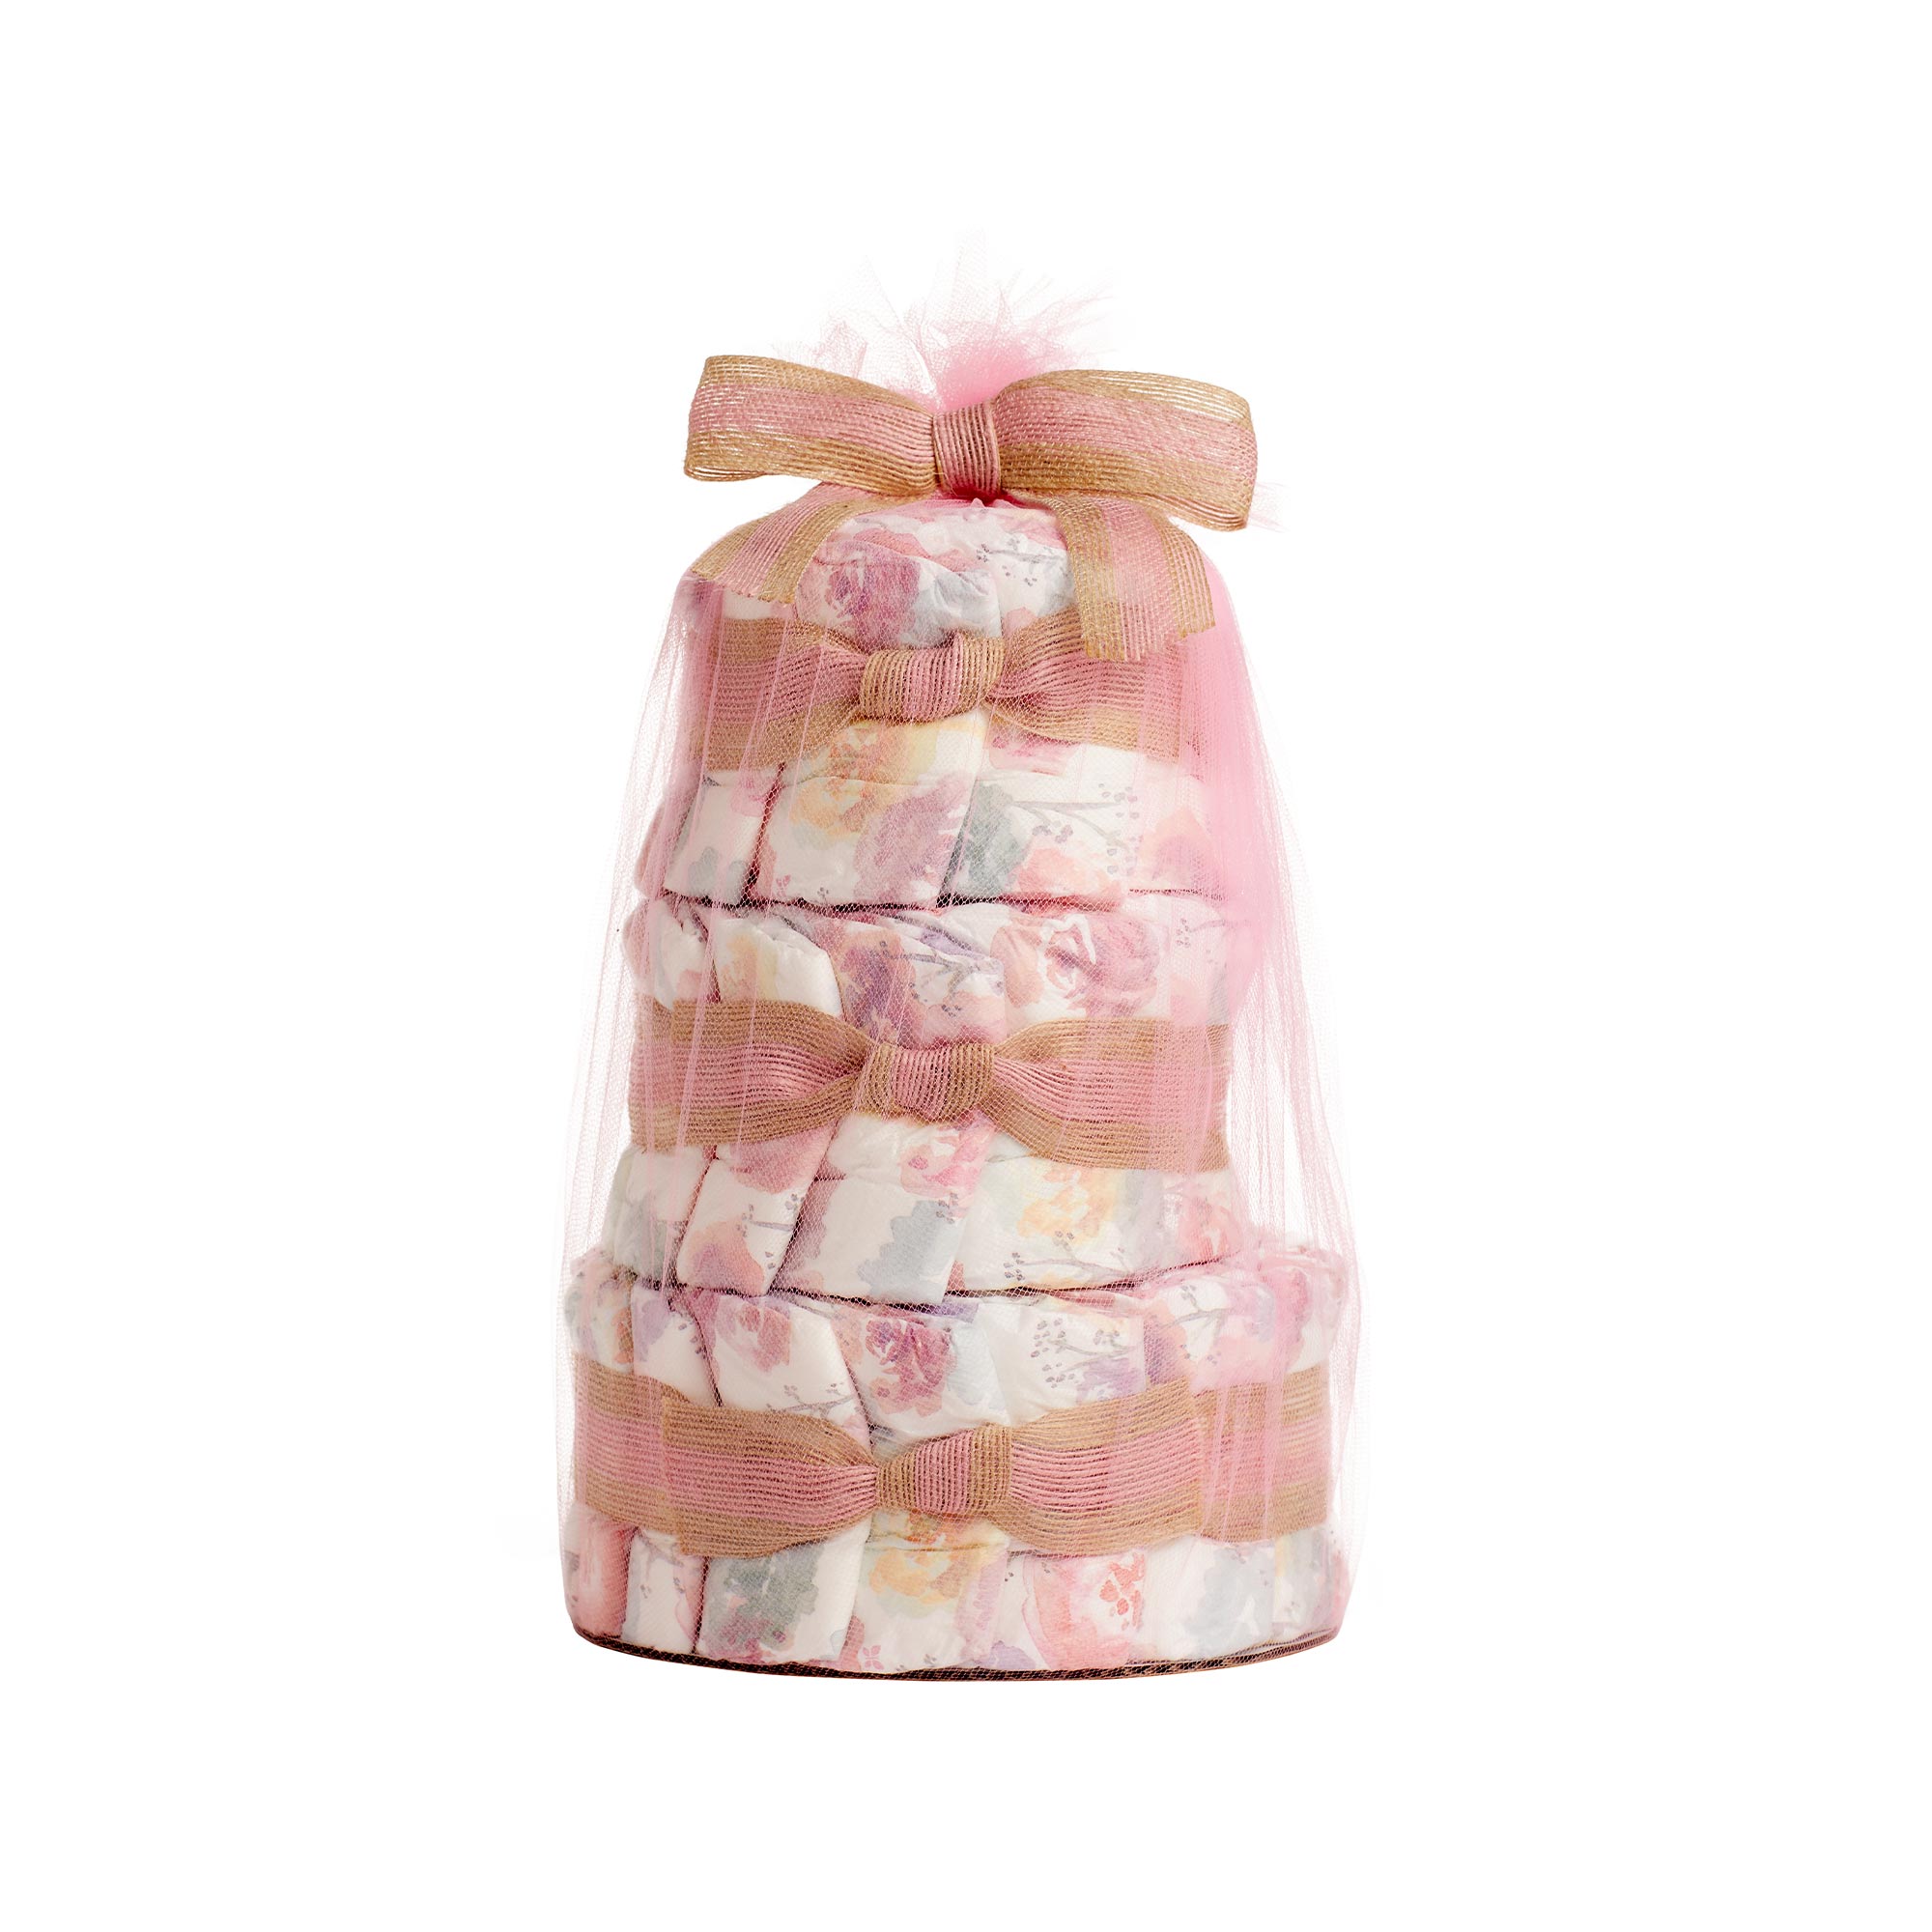 Honest Baby Diaper Cake, Rose Blossoms, Size Standard, Hypoallergenic, Plant-Based, Plant-Derived Ingredients